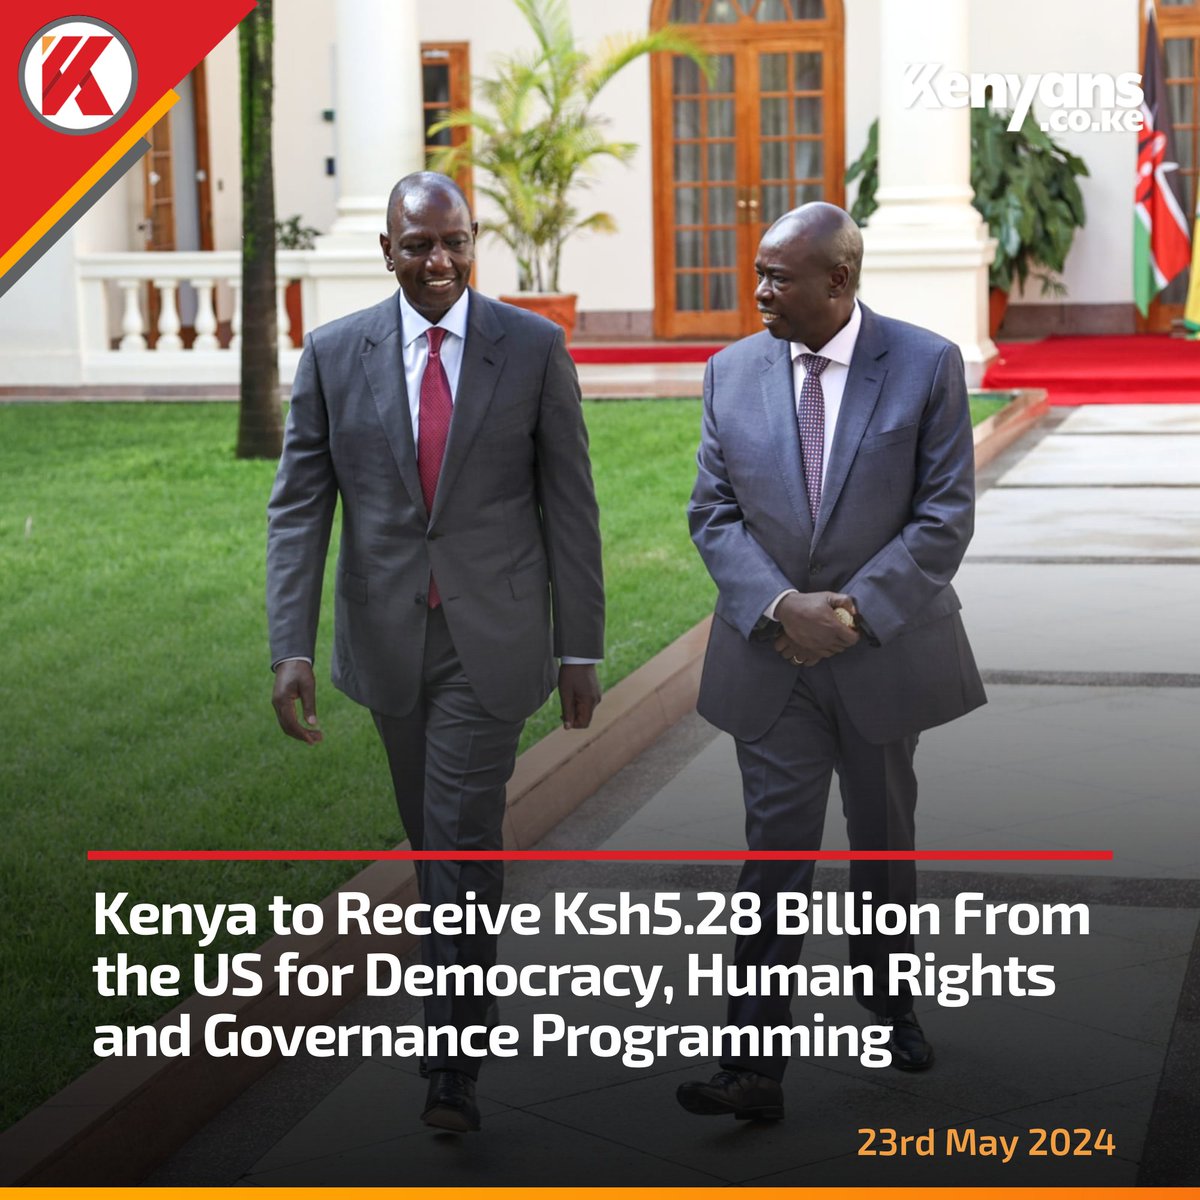 Kenya to receive Ksh5.28 billion from the US for democracy, human rights and governance programming